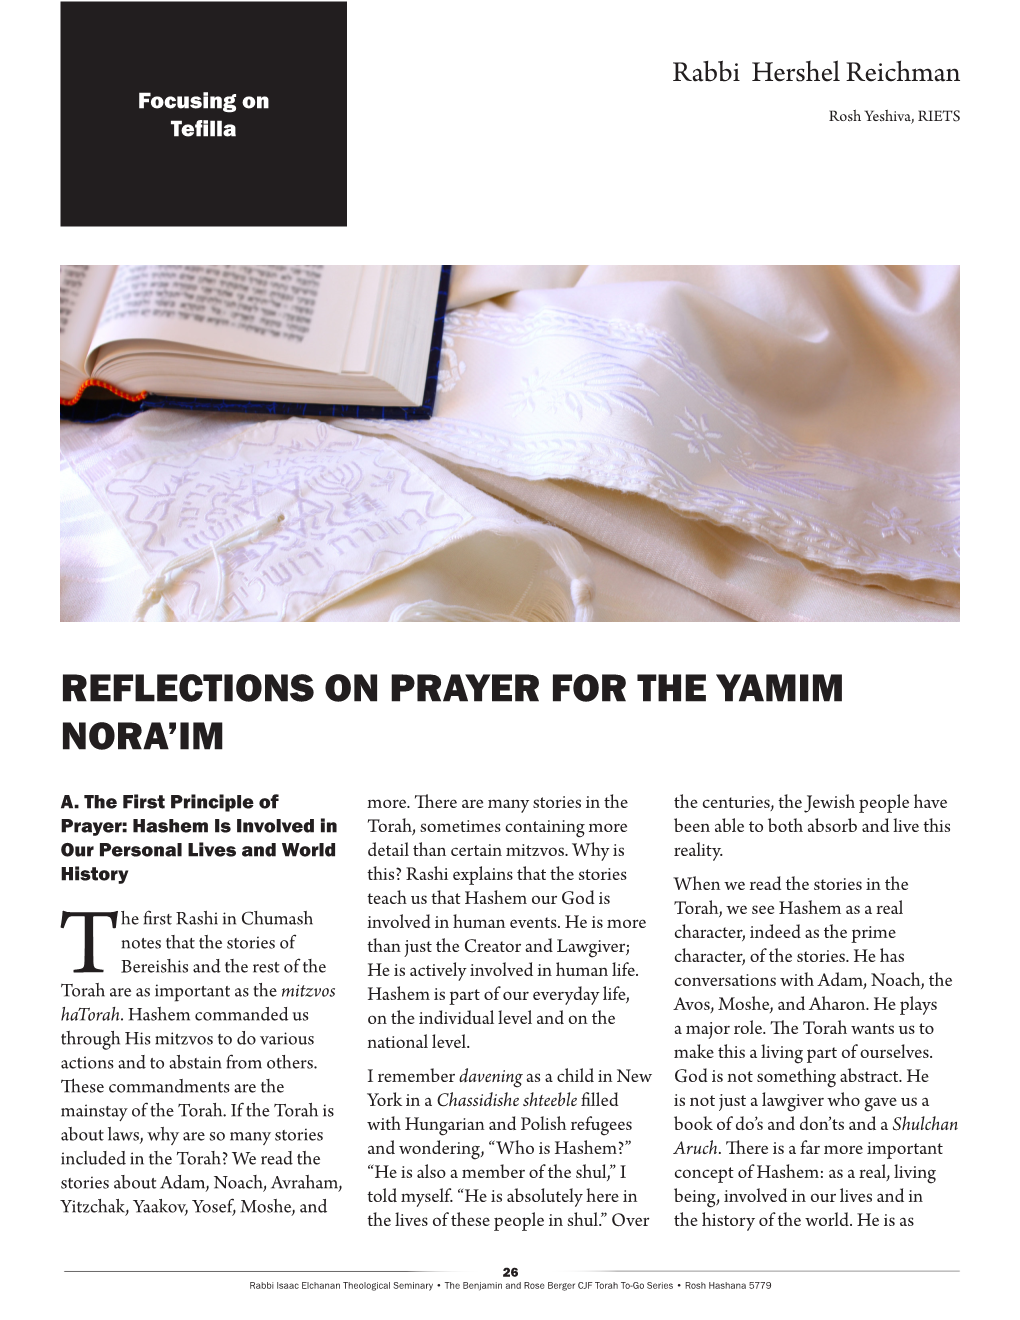 Reflections on Prayer for the Yamim Nora'im